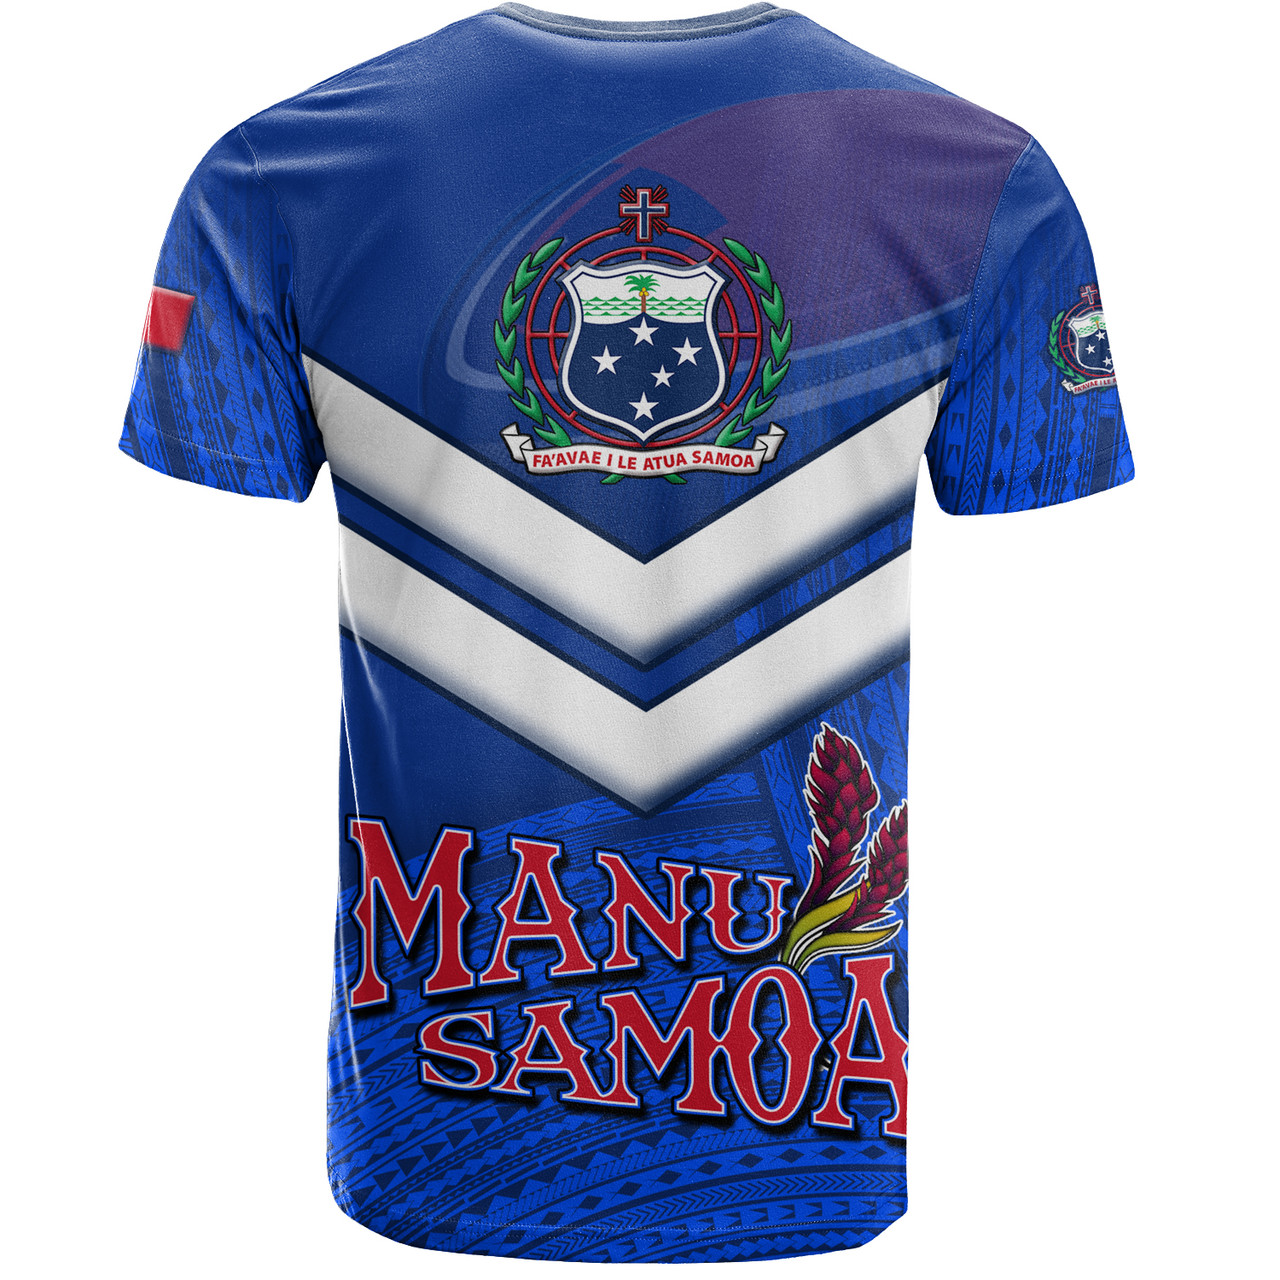 Samoa T-Shirt Samoa Tradition Patterns With Rugby Ball